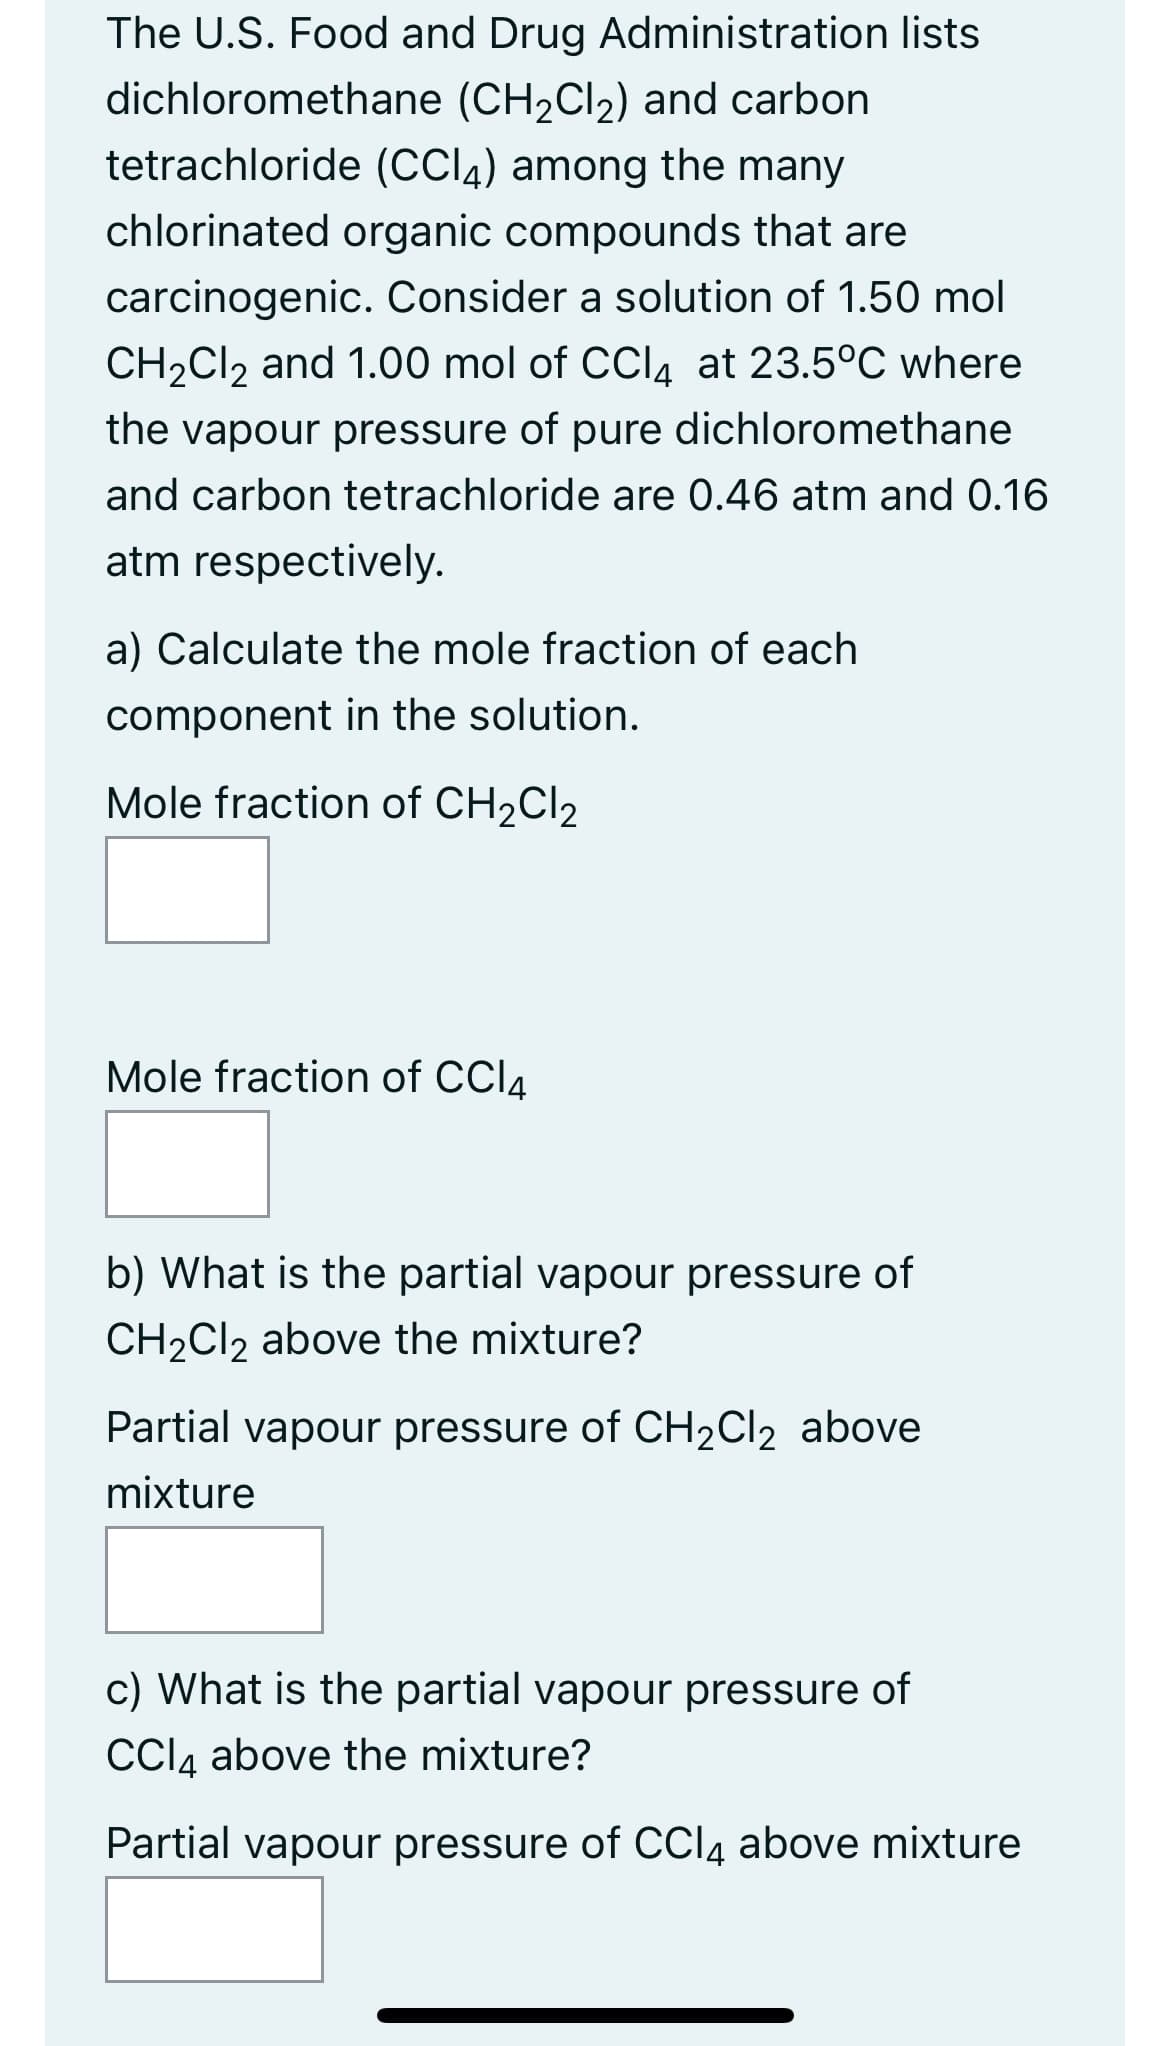 The U.S. Food and Drug Administration lists
dichloromethane (CH₂Cl₂) and carbon
tetrachloride (CCI) among the many
chlorinated organic compounds that are
carcinogenic. Consider a solution of 1.50 mol
CH₂Cl2 and 1.00 mol of CCl4 at 23.5°C where
the vapour pressure of pure dichloromethane
and carbon tetrachloride are 0.46 atm and 0.16
atm respectively.
a) Calculate the mole fraction of each
component in the solution.
Mole fraction of CH₂Cl₂
Mole fraction of CCl4
b) What is the partial vapour pressure of
CH₂Cl2 above the mixture?
Partial vapour pressure of CH₂Cl₂ above
mixture
c) What is the partial vapour pressure of
CCl4 above the mixture?
Partial vapour pressure of CCl4 above mixture